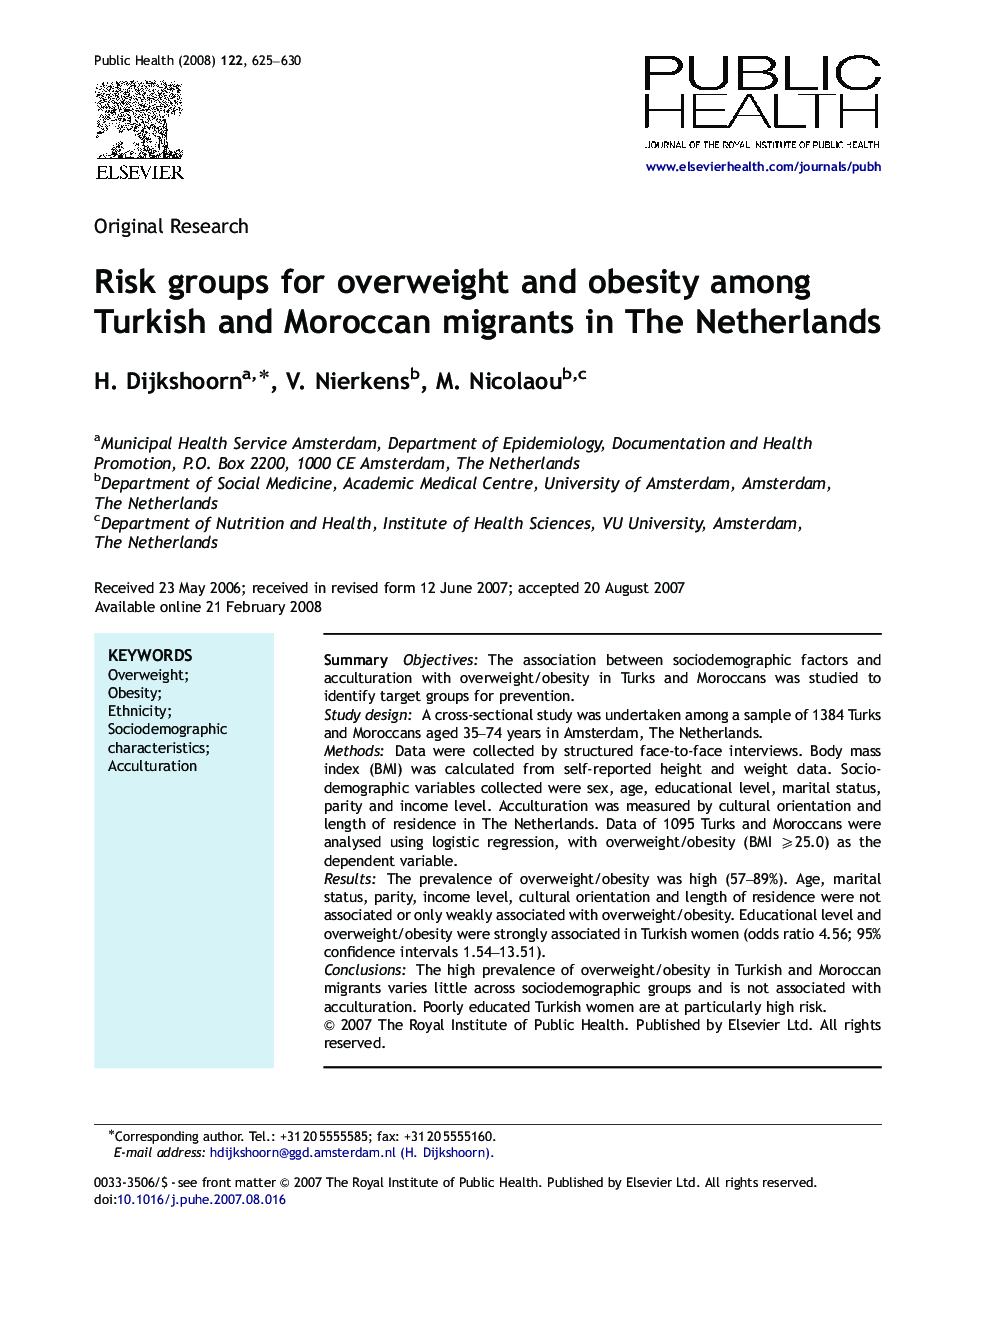 Risk groups for overweight and obesity among Turkish and Moroccan migrants in The Netherlands